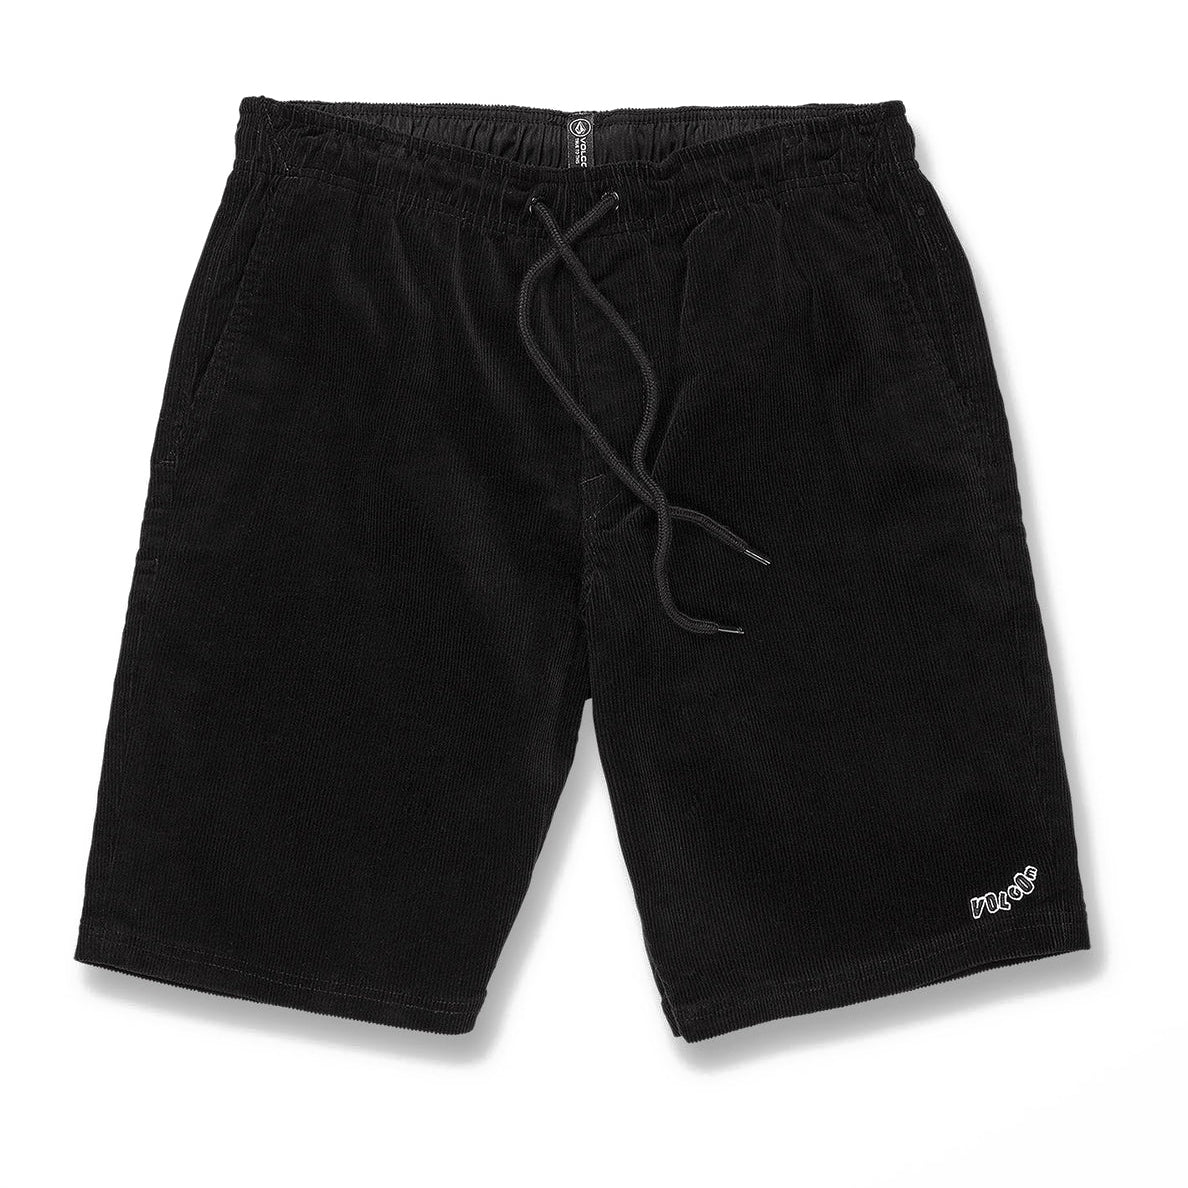 OUTER SPACED SHORT 21 BLACK COMBO